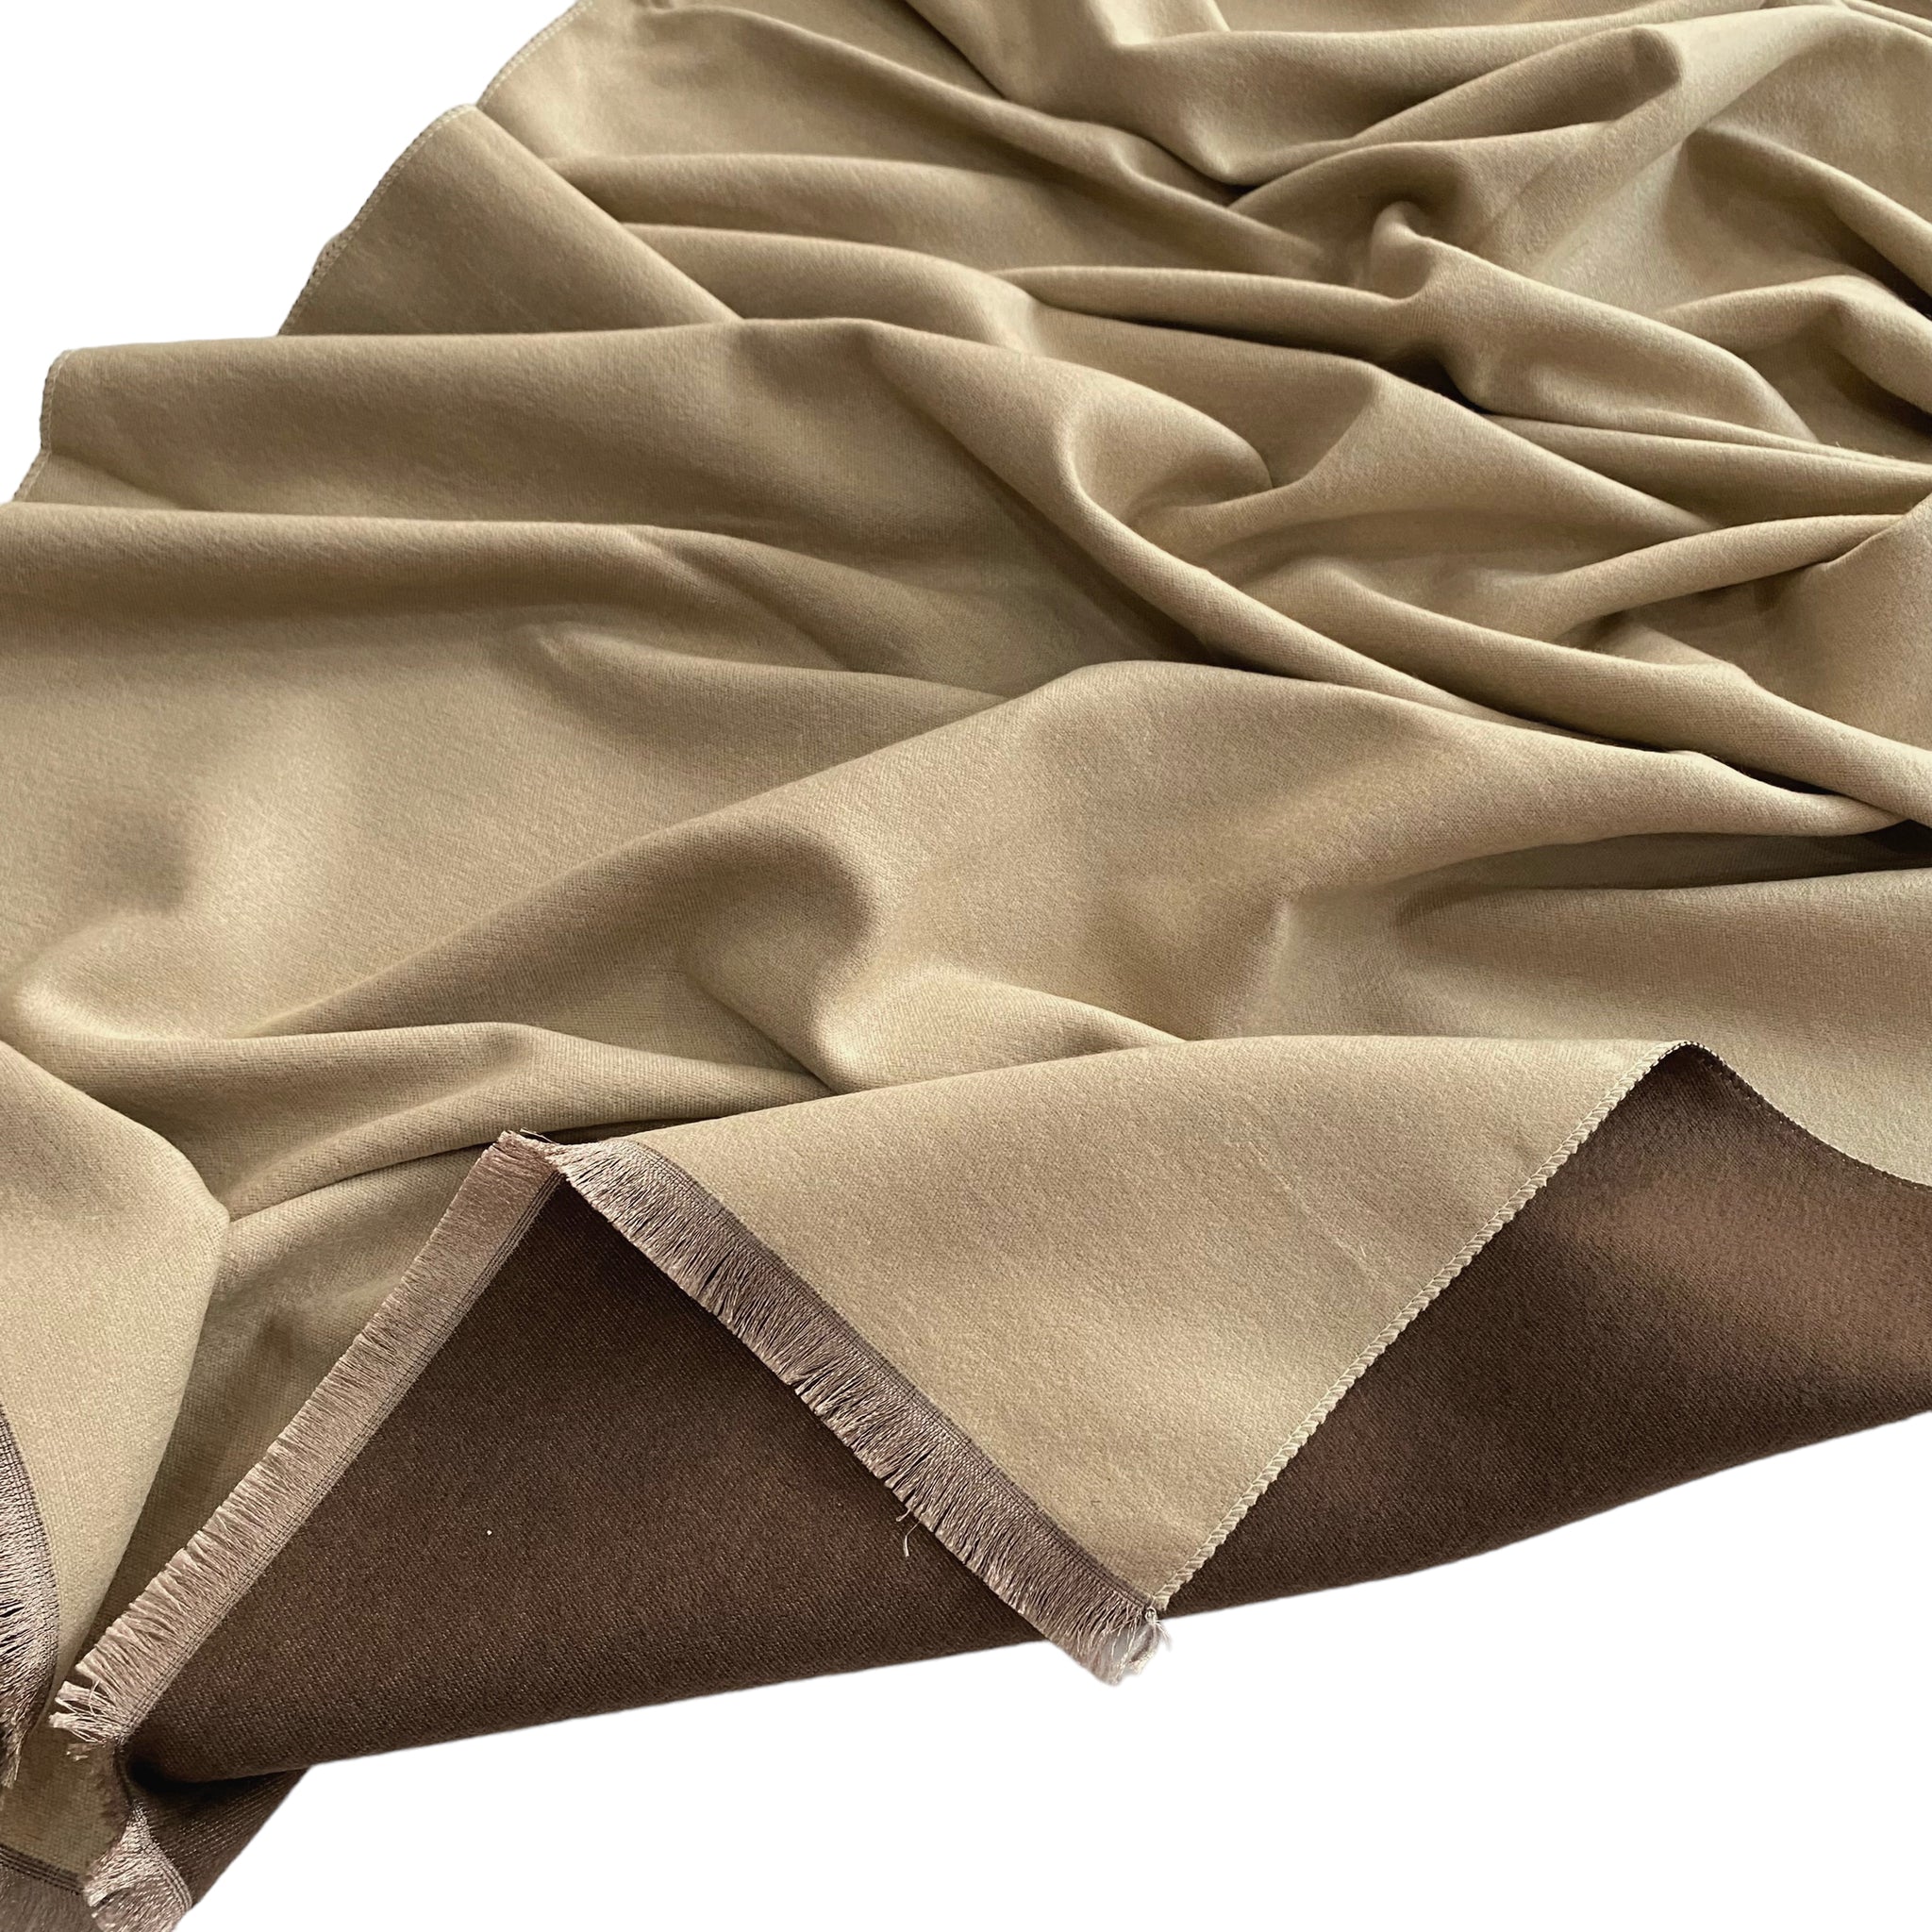 Reversible Stole - Beige & Chocolate